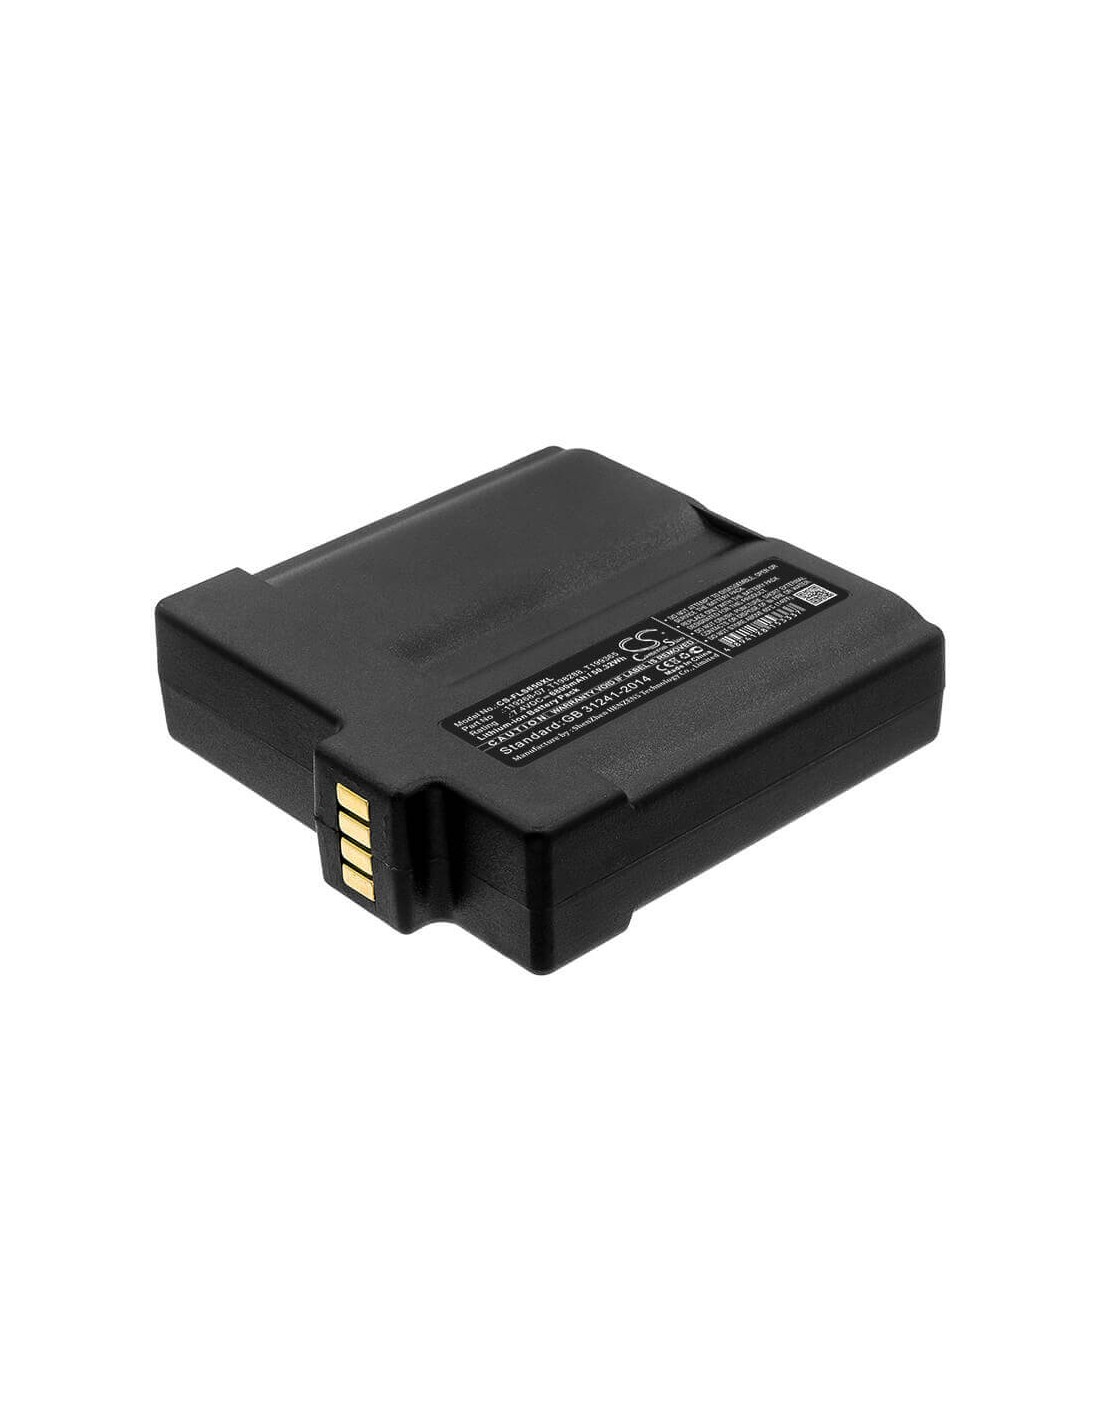 Battery for Flir, Division T199365acc, T199365acc, Thermacam B20 7.4V, 6800mAh - 50.32Wh